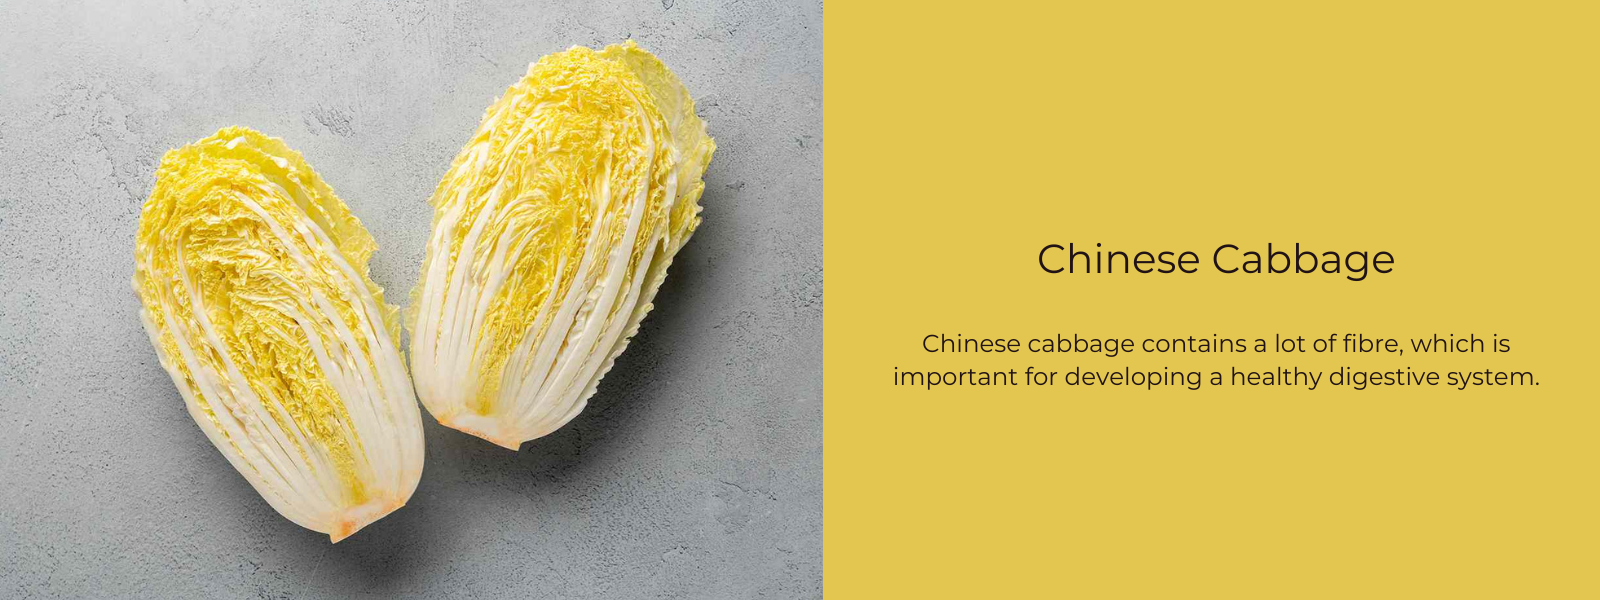 Chinese Cabbage – Health Benefits, Uses and Important Facts